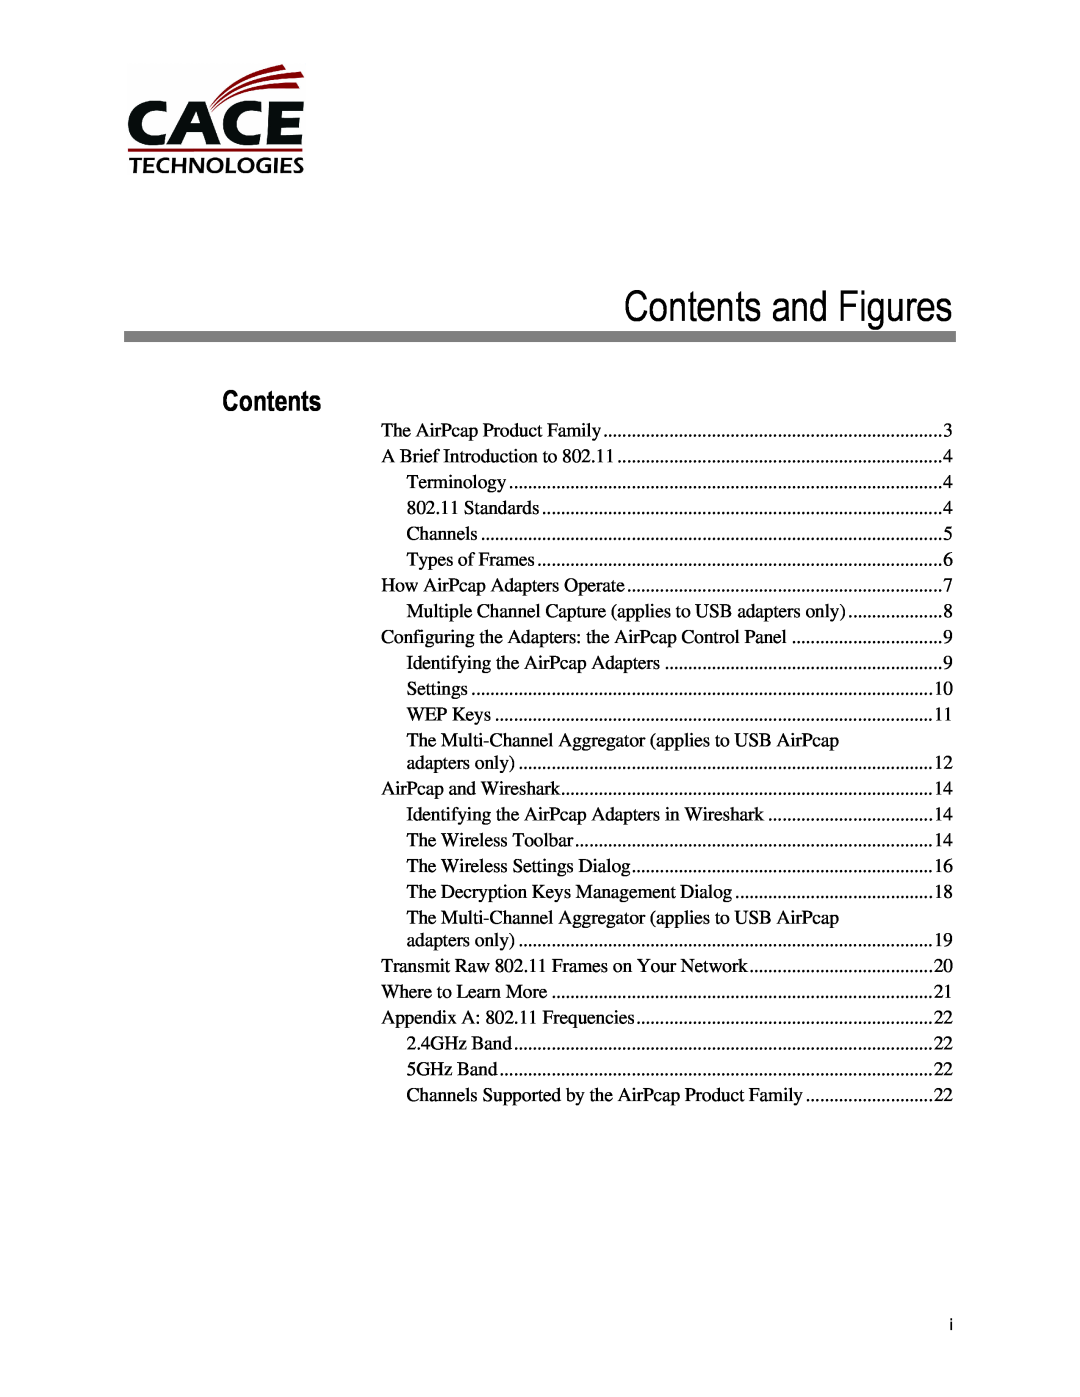 Cace Technologies AirPcap Wireless Capture Adapters manual Contents and Figures 